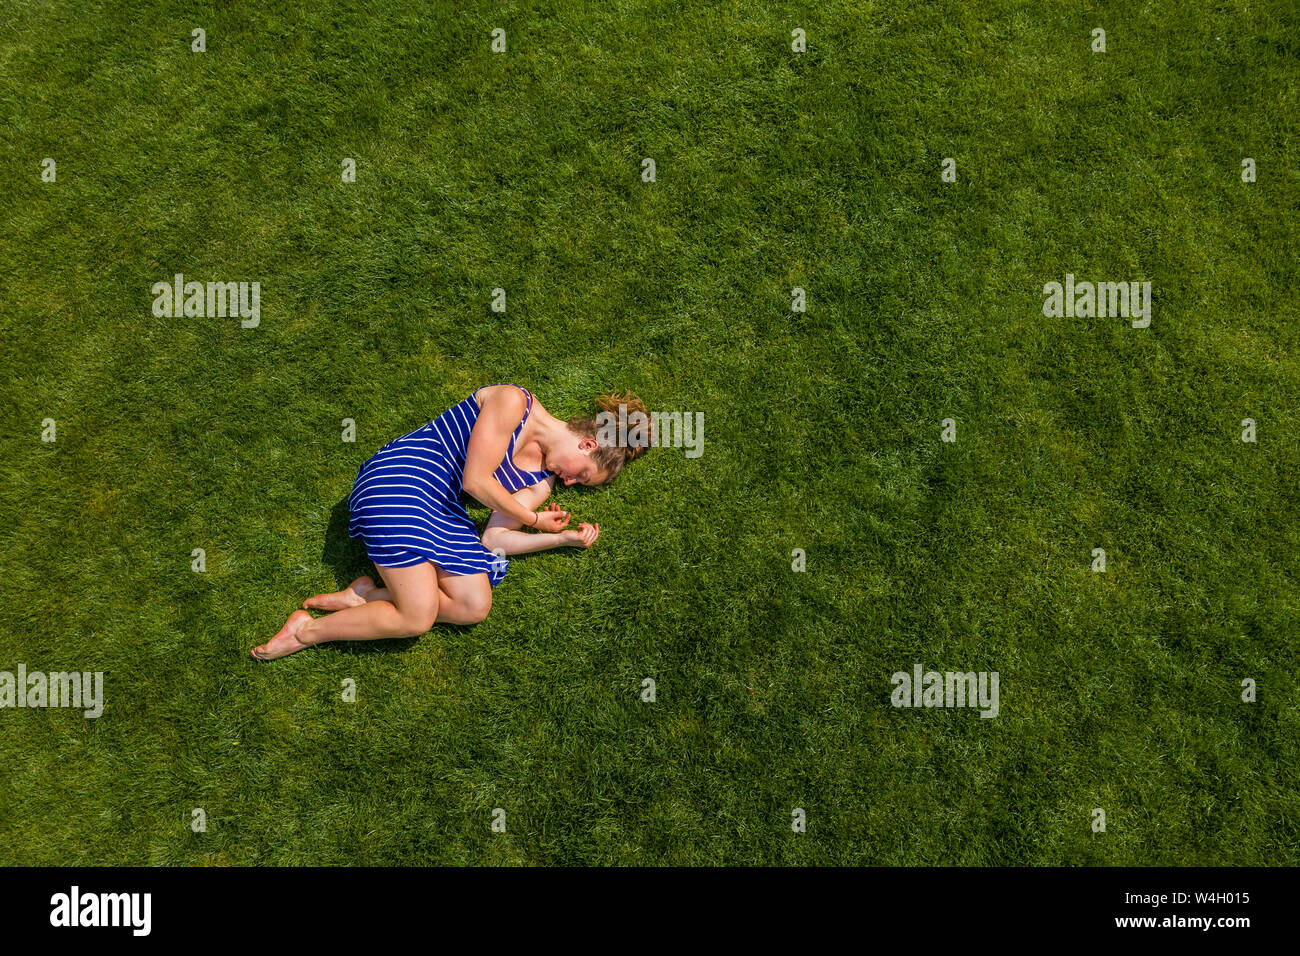 Aerial view of a young woman lying on a meadow Stock Photo